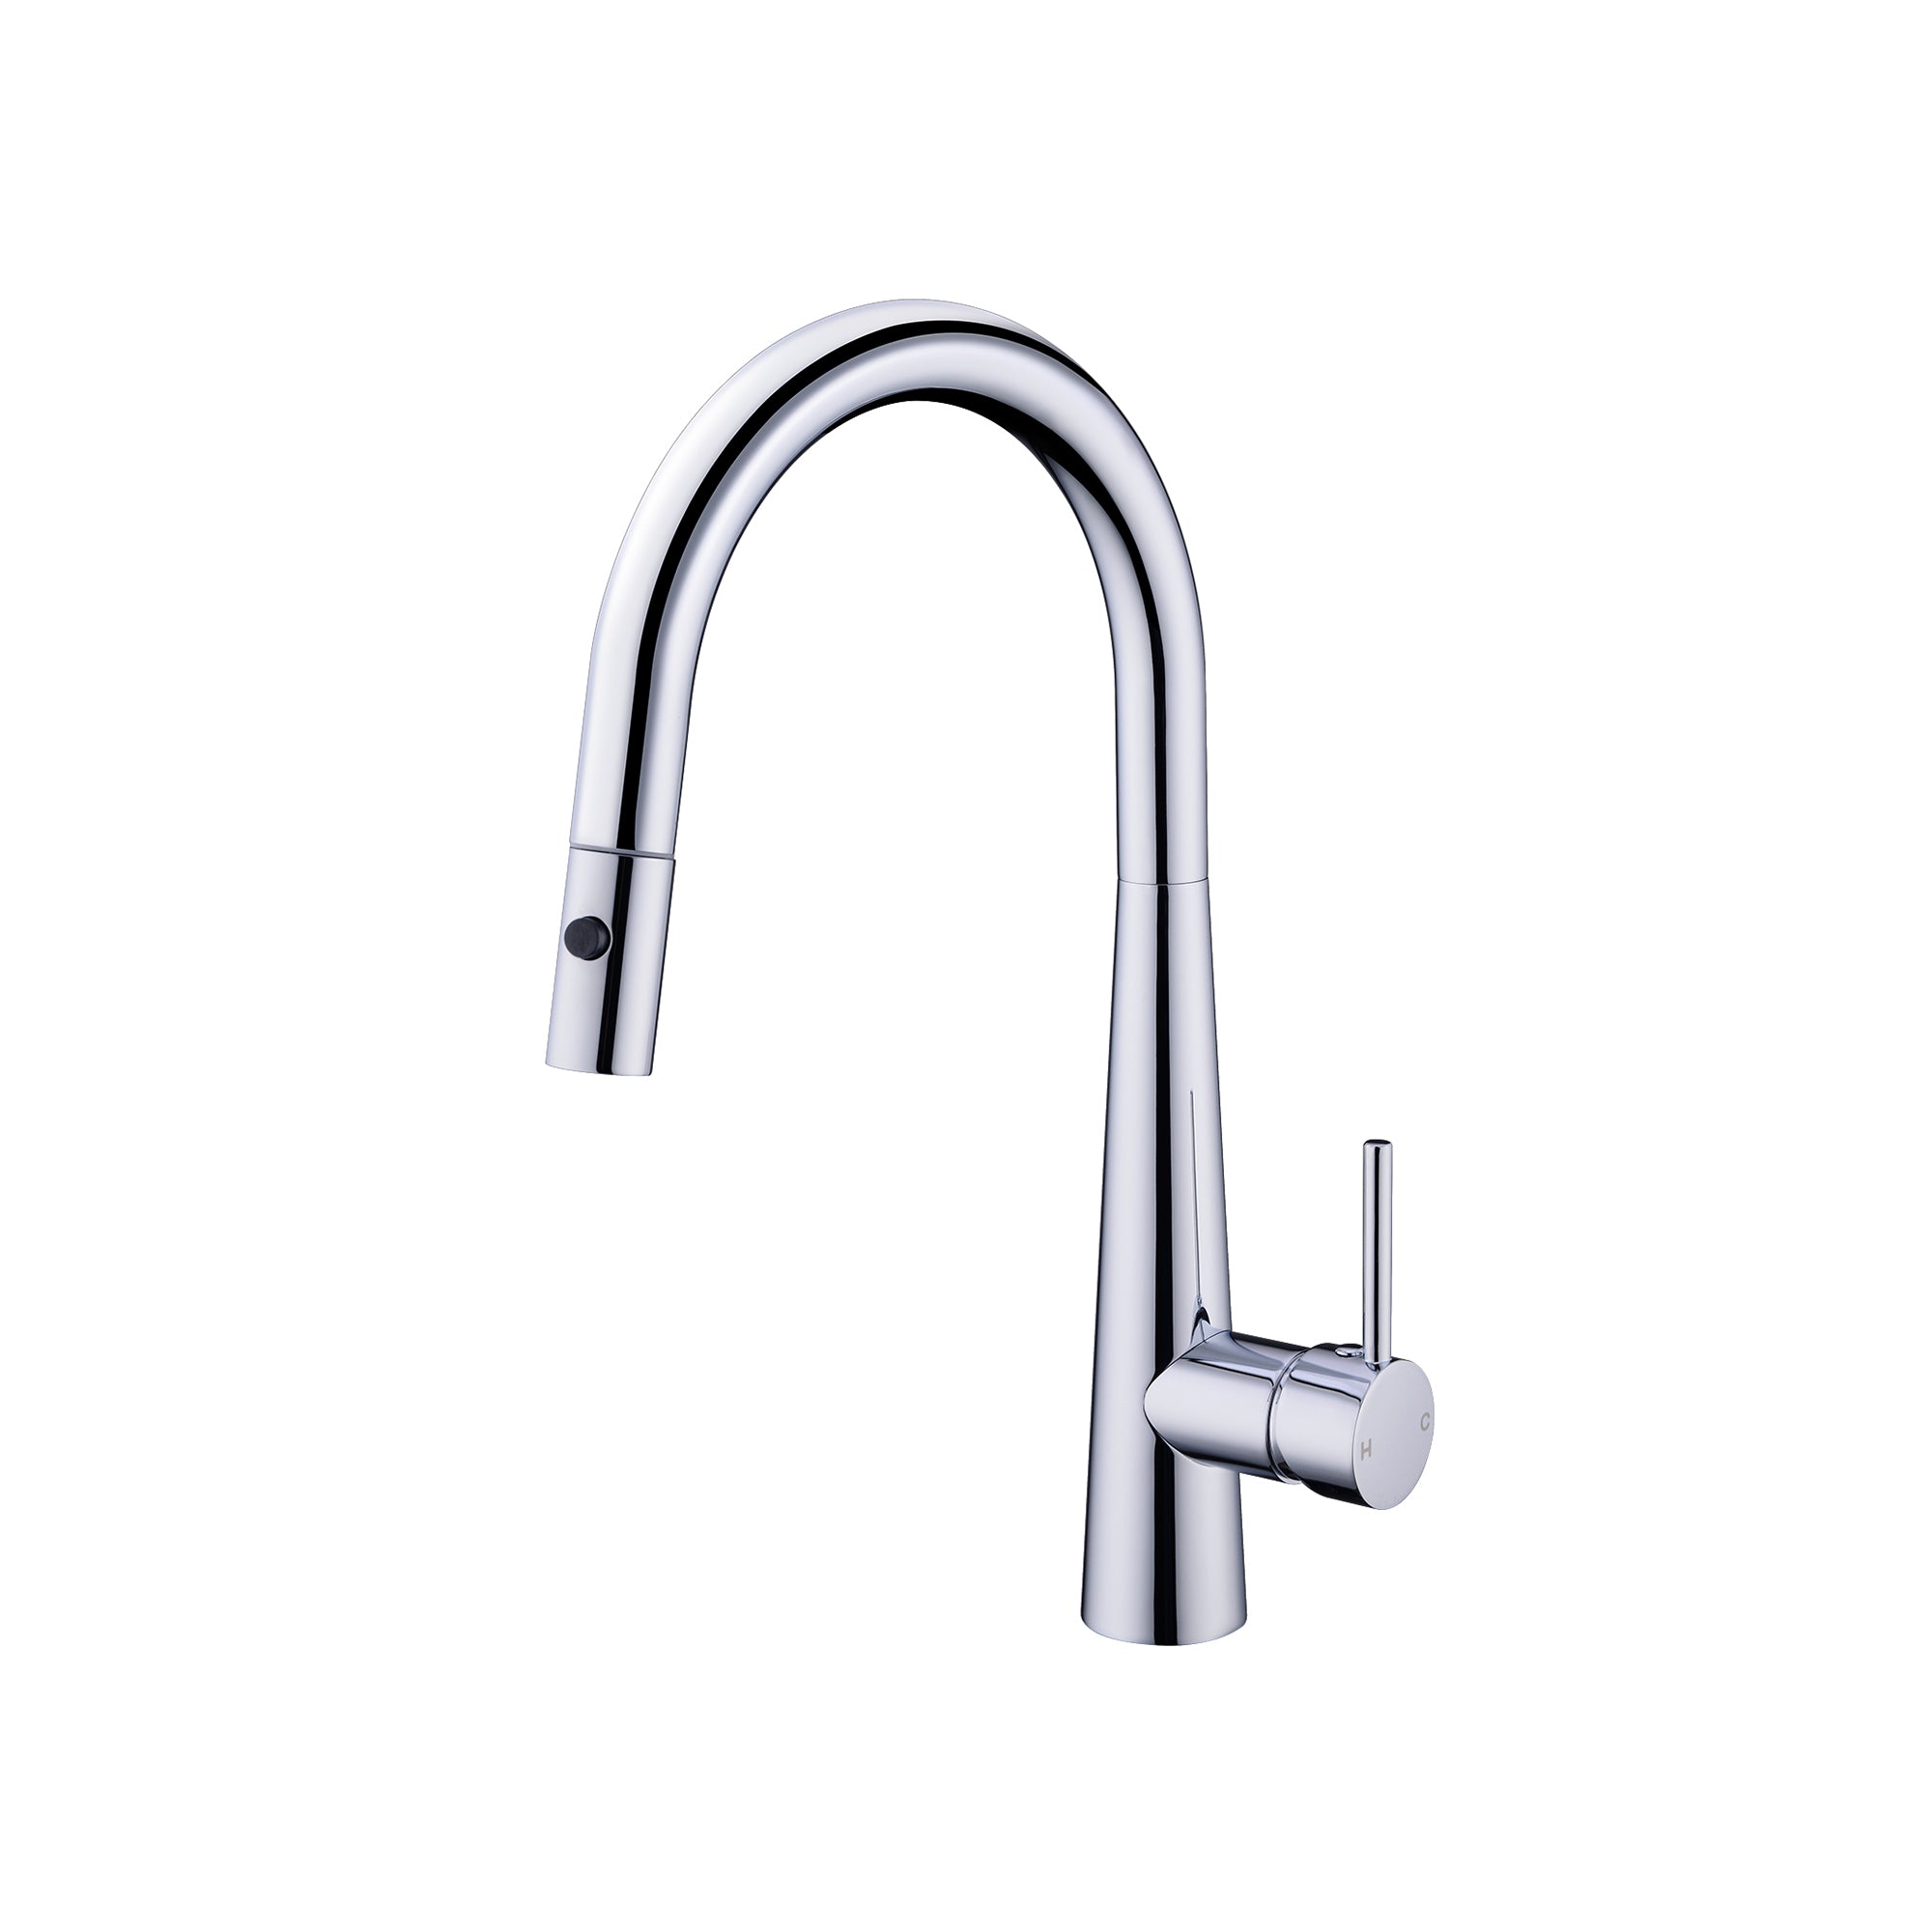 Dolce Pull Out Sink Mixer With Vegie Spray Function Chrome - NR581009cCH